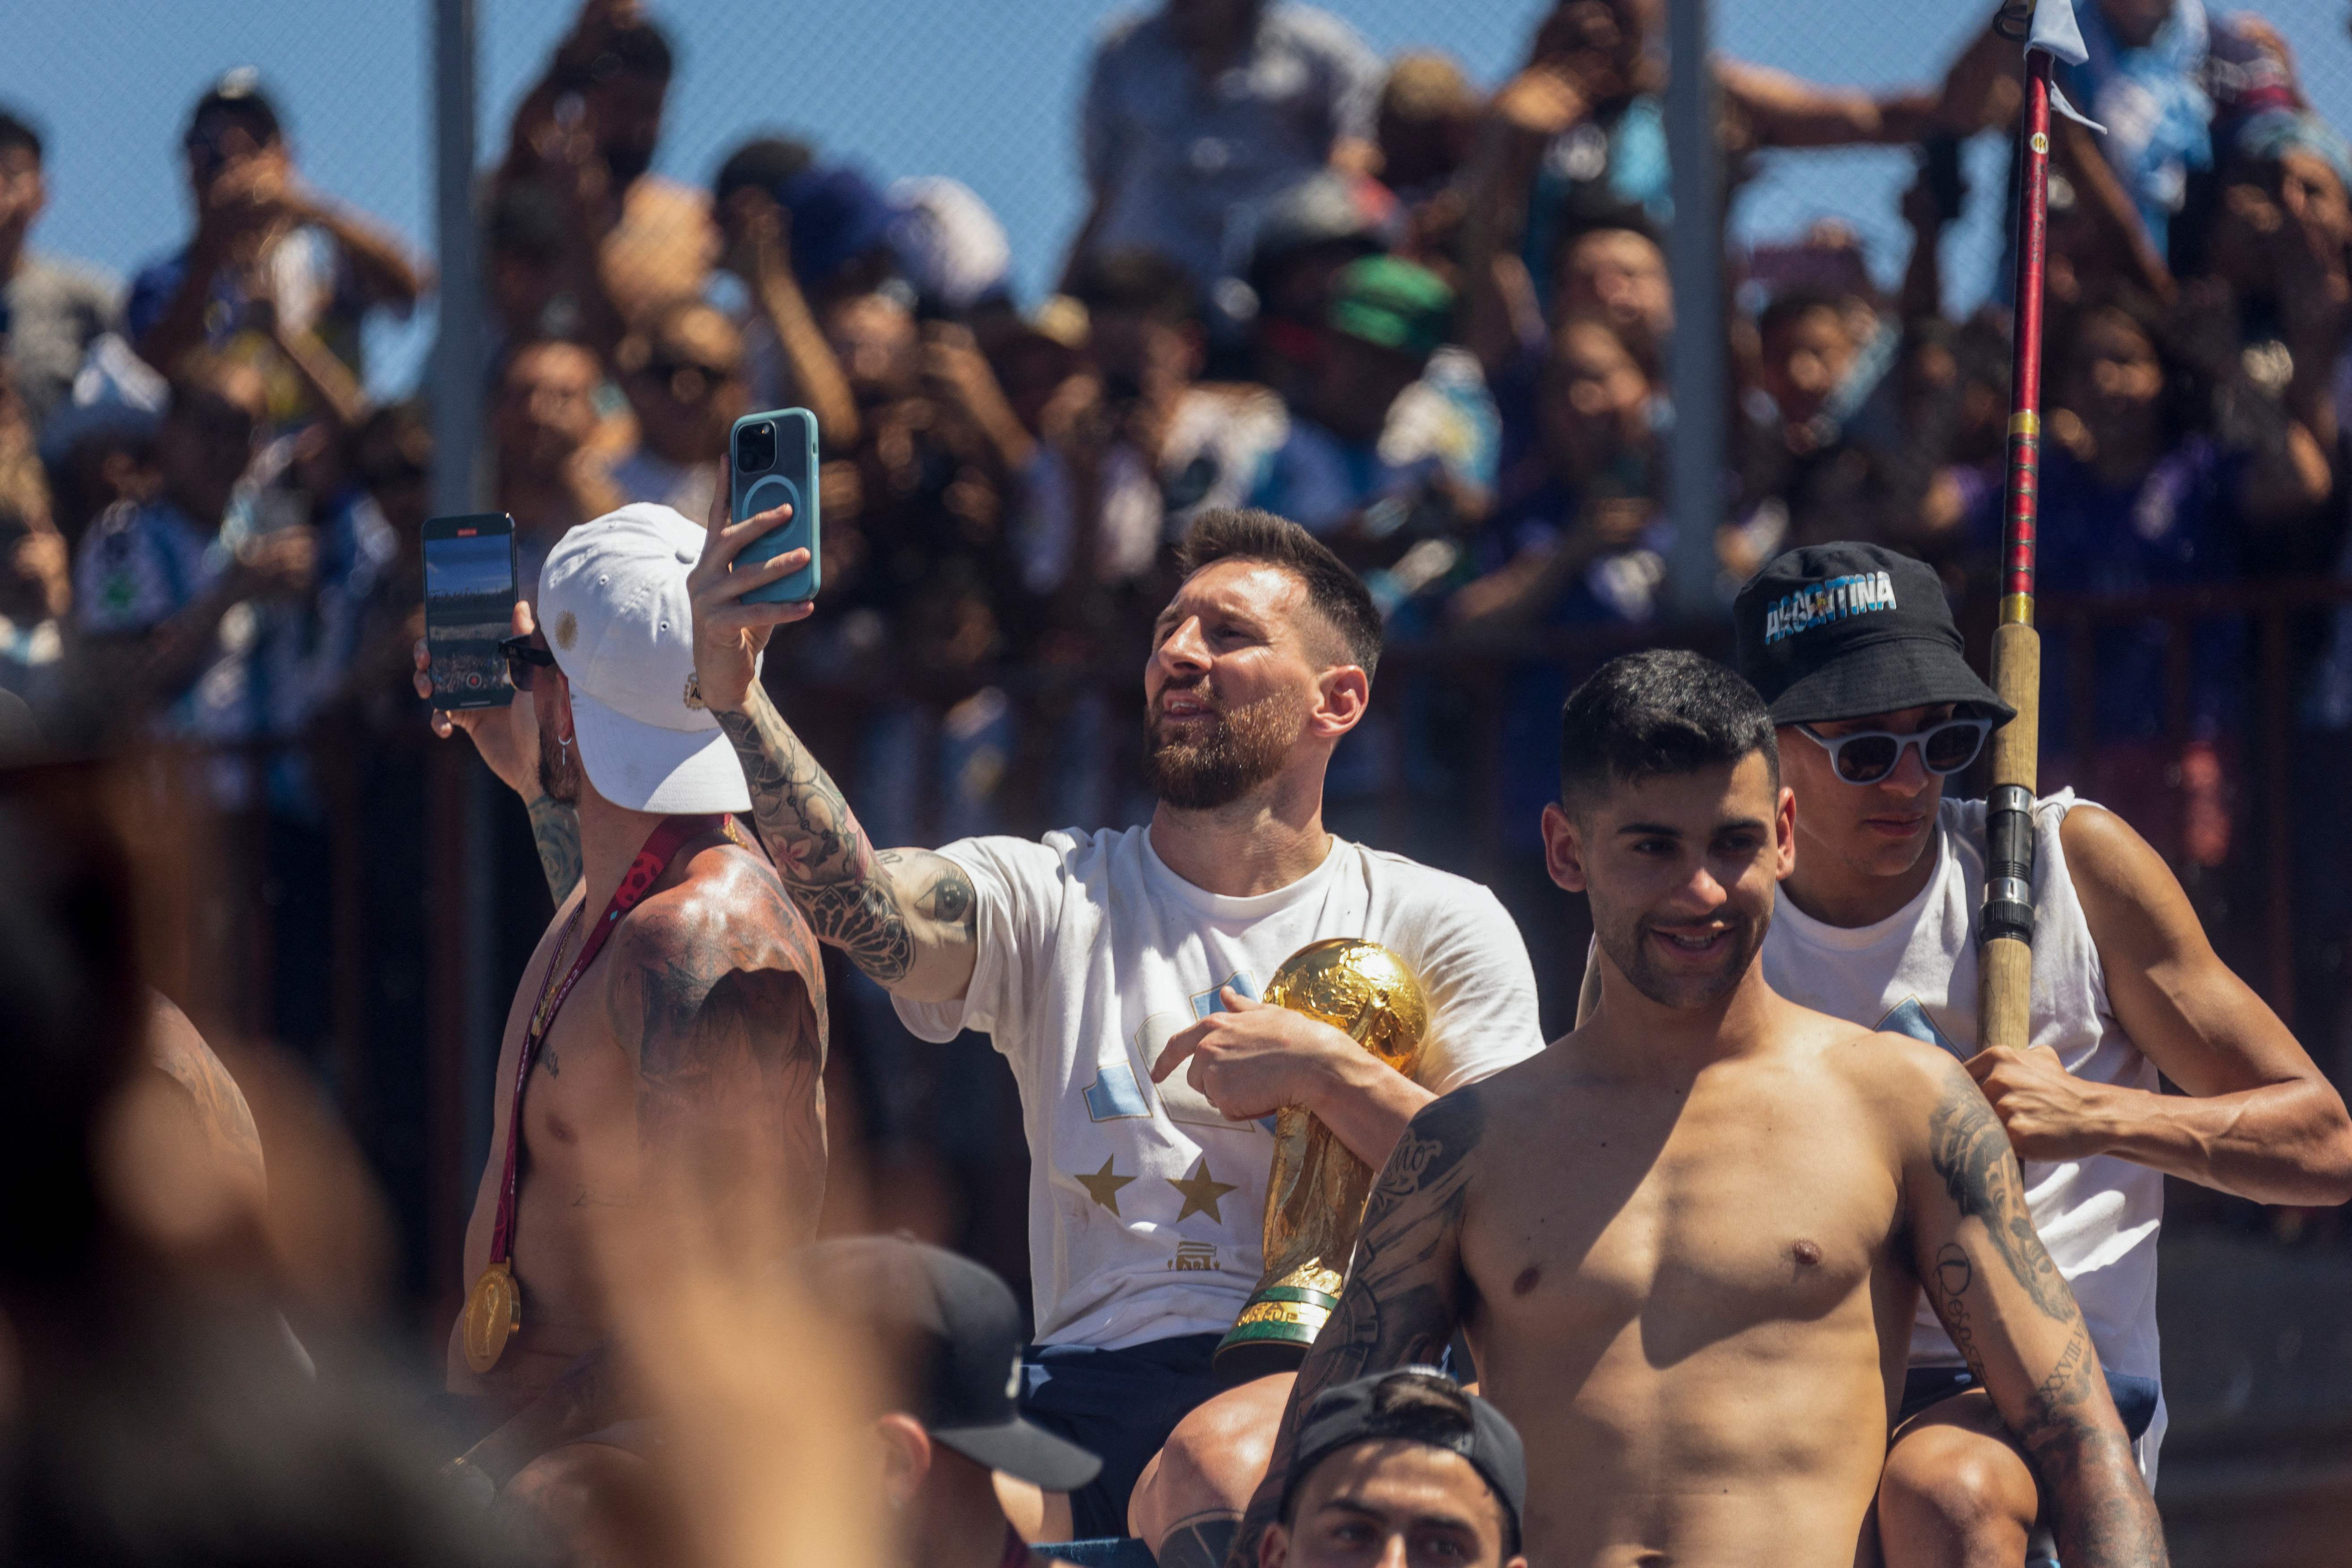 Lionel Messi takes pictures with his phone while celebrating on the bus